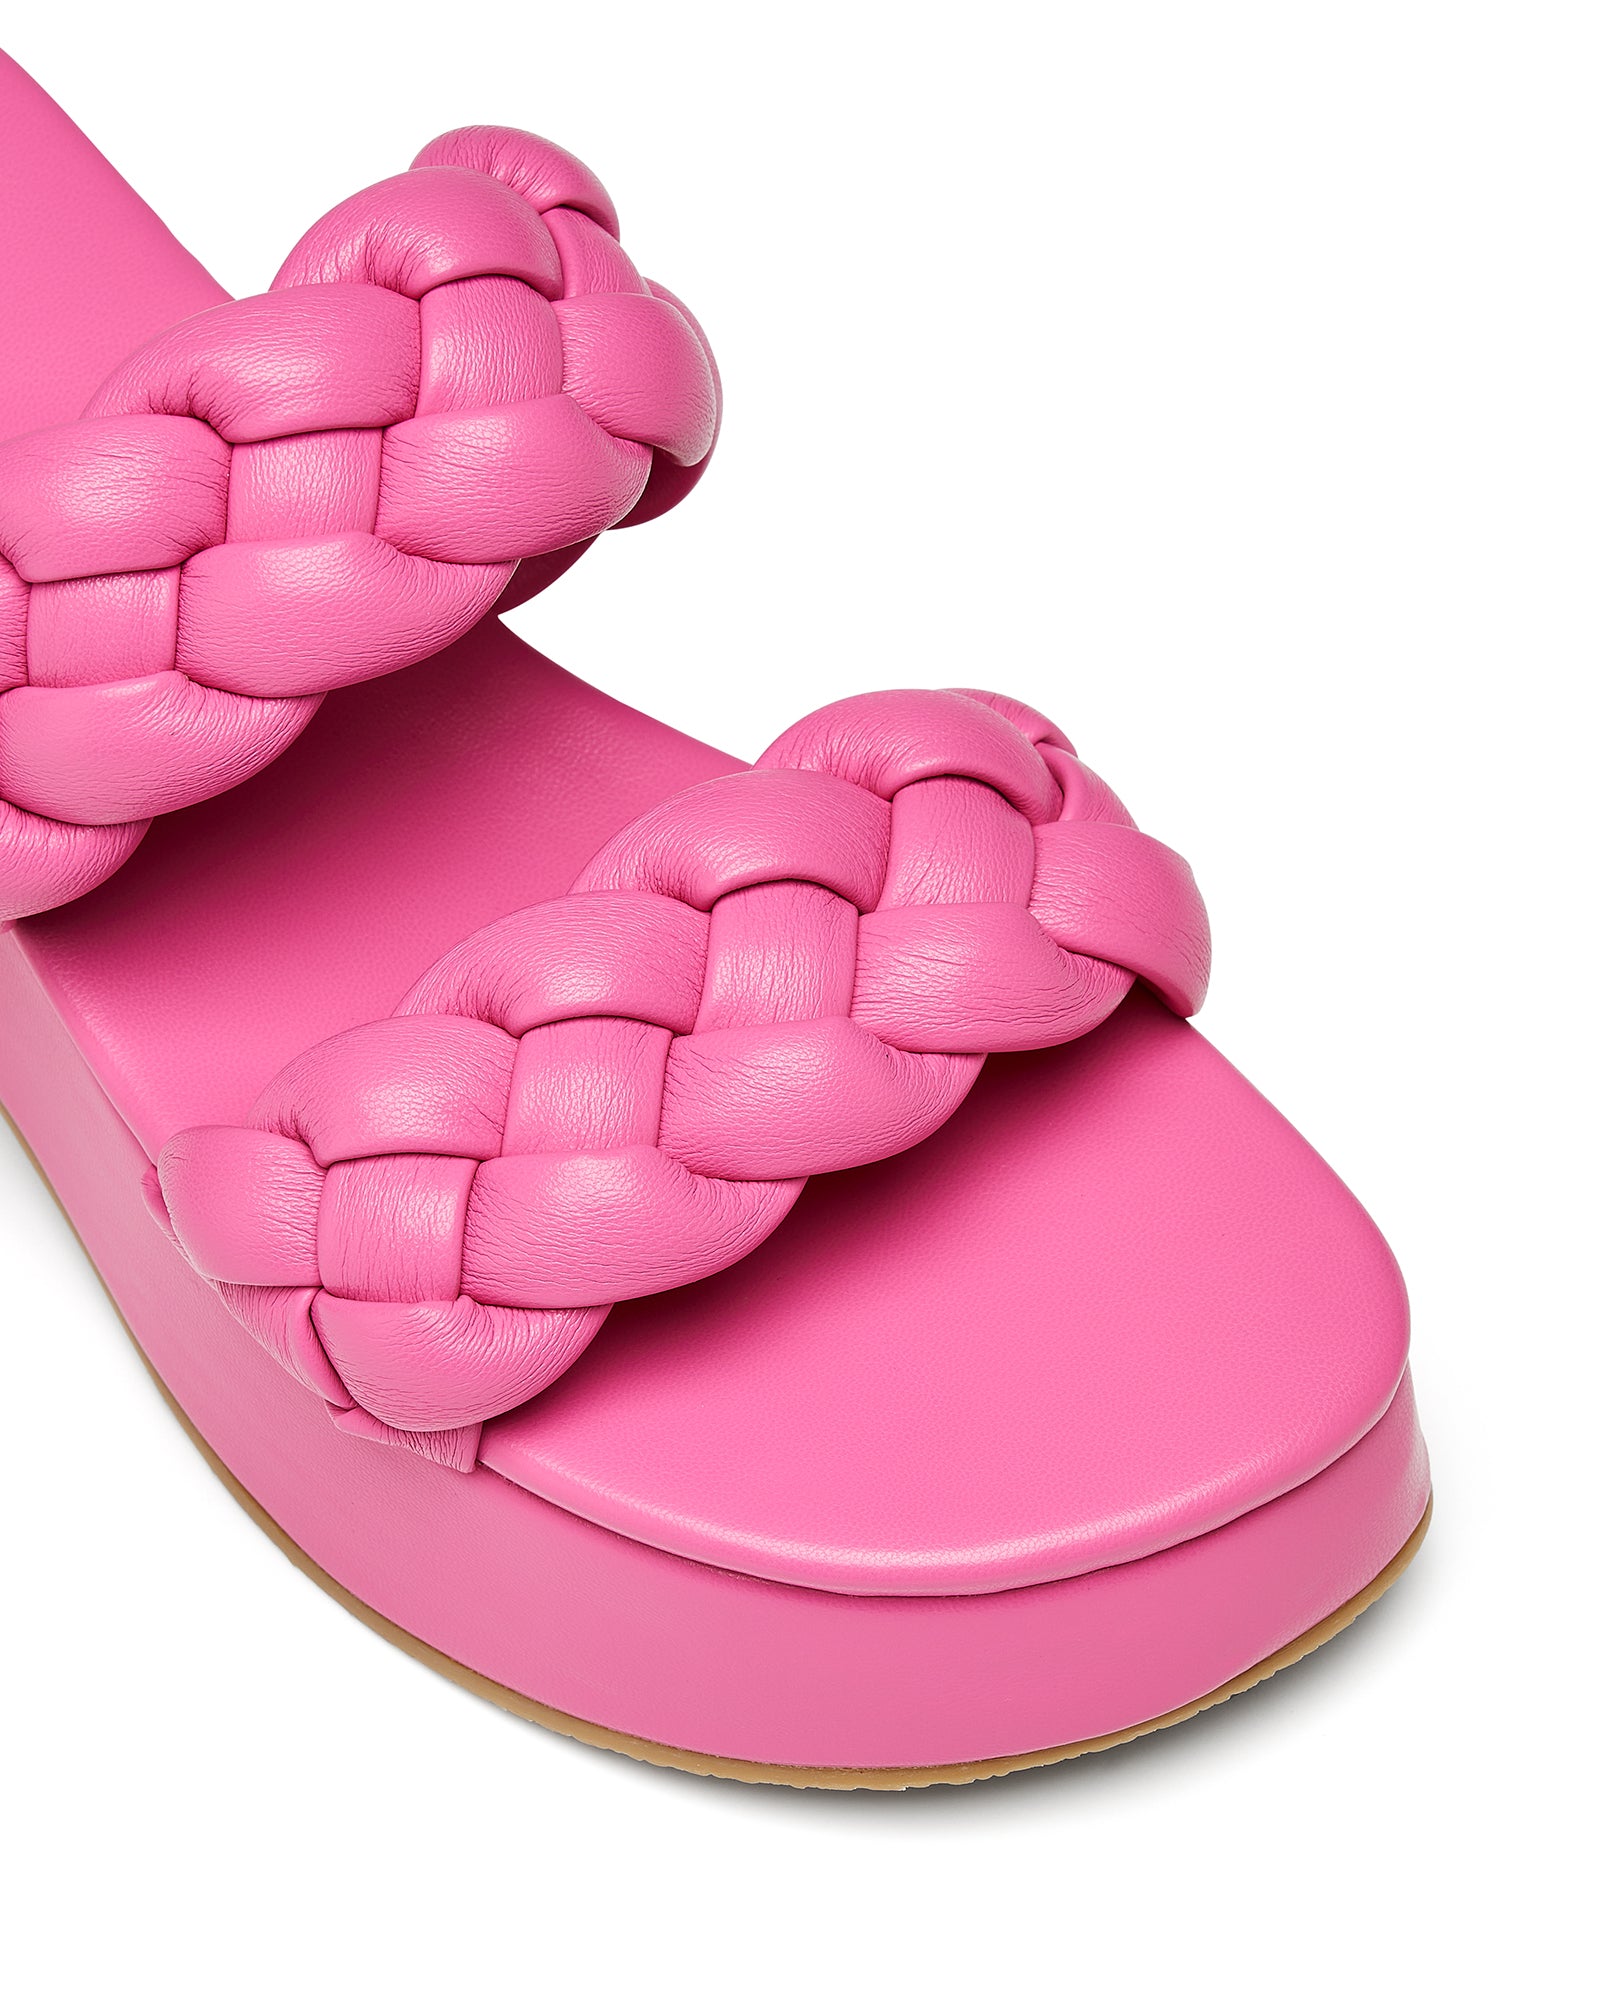 Therapy Shoes Christy Pink | Women's Sandals | Slides | Platform | Woven